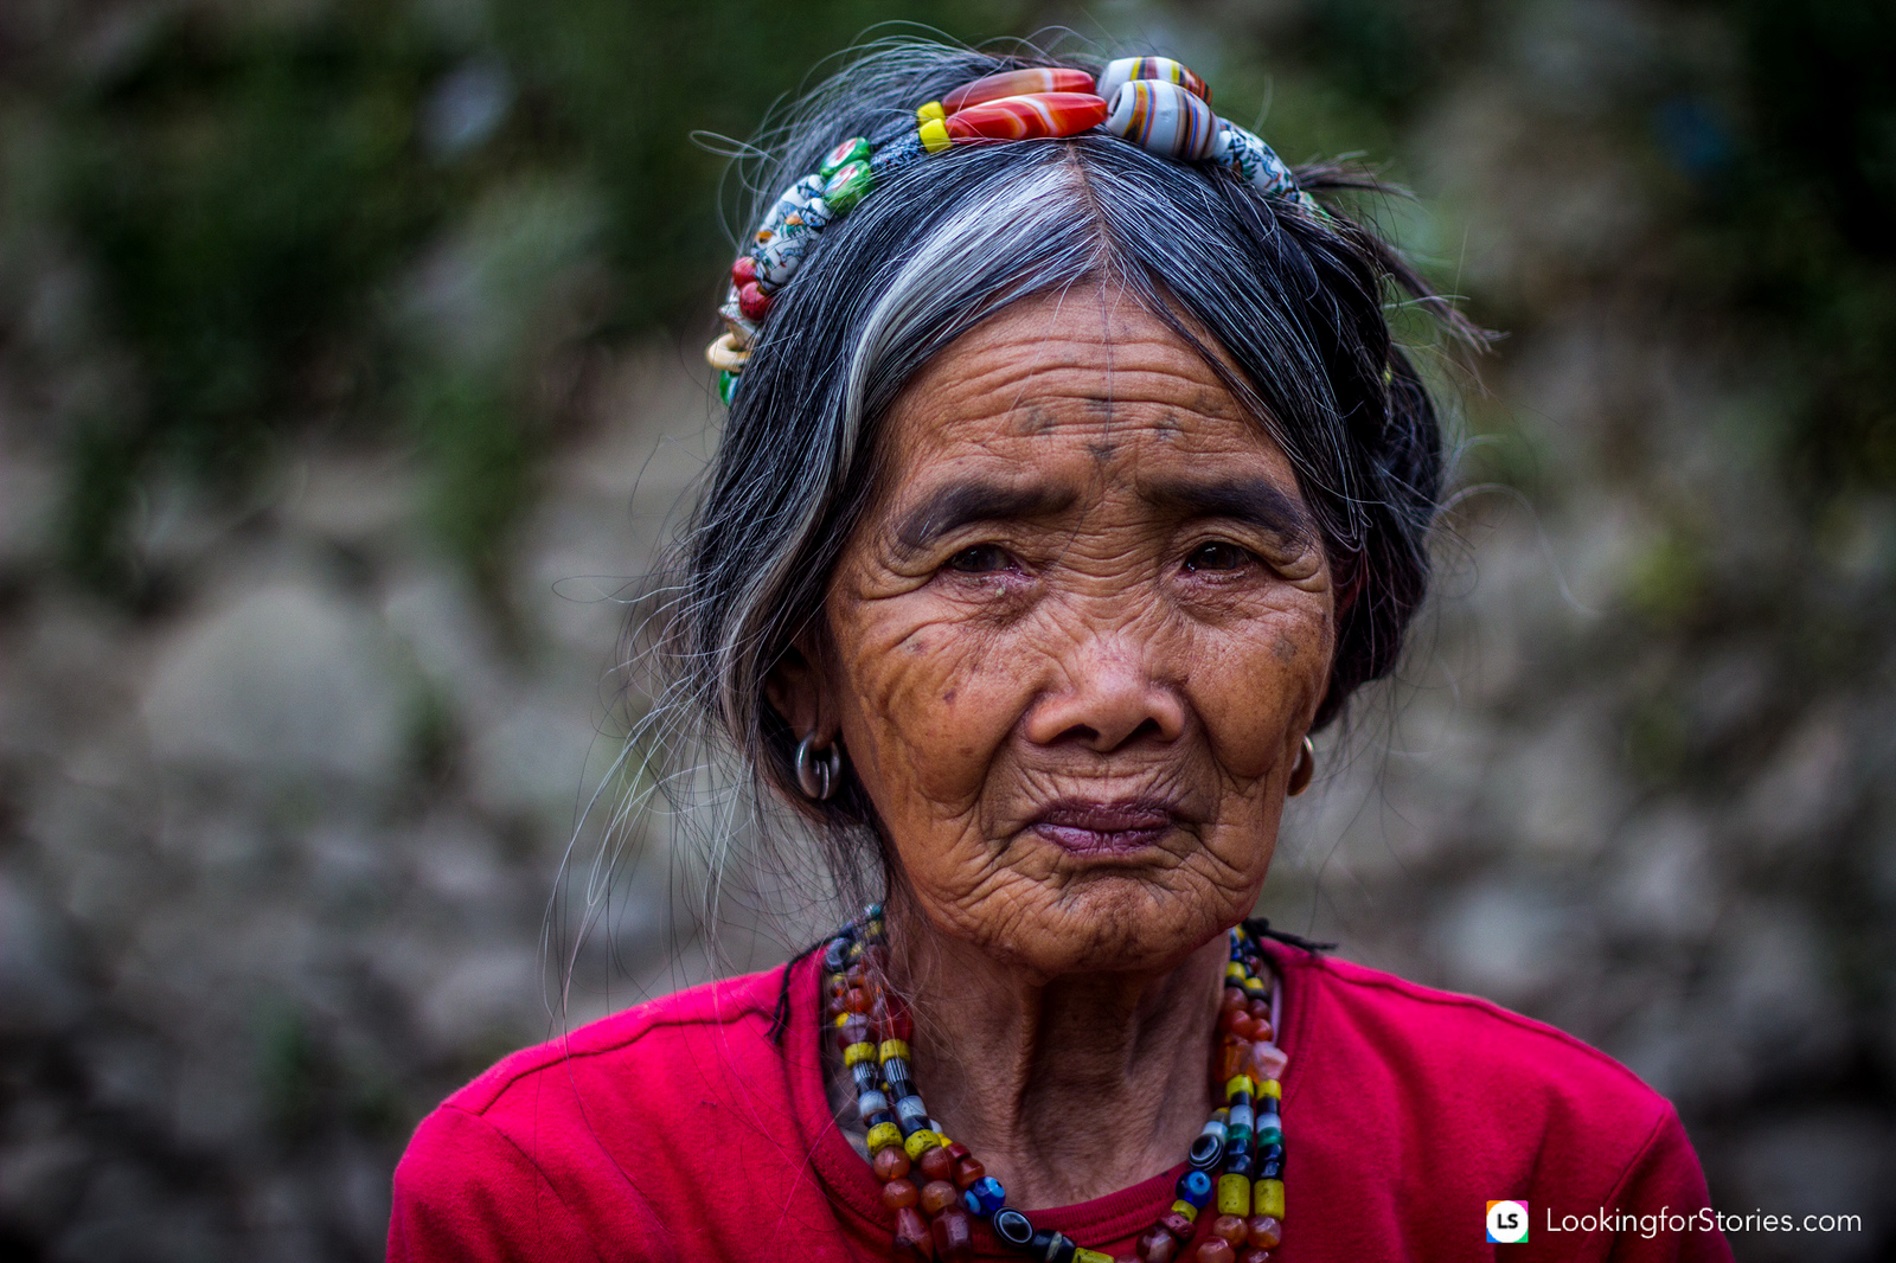 Whang Od is 92 years old and the last Kalinga tattoo maker, a practice dating back 1,000 years.